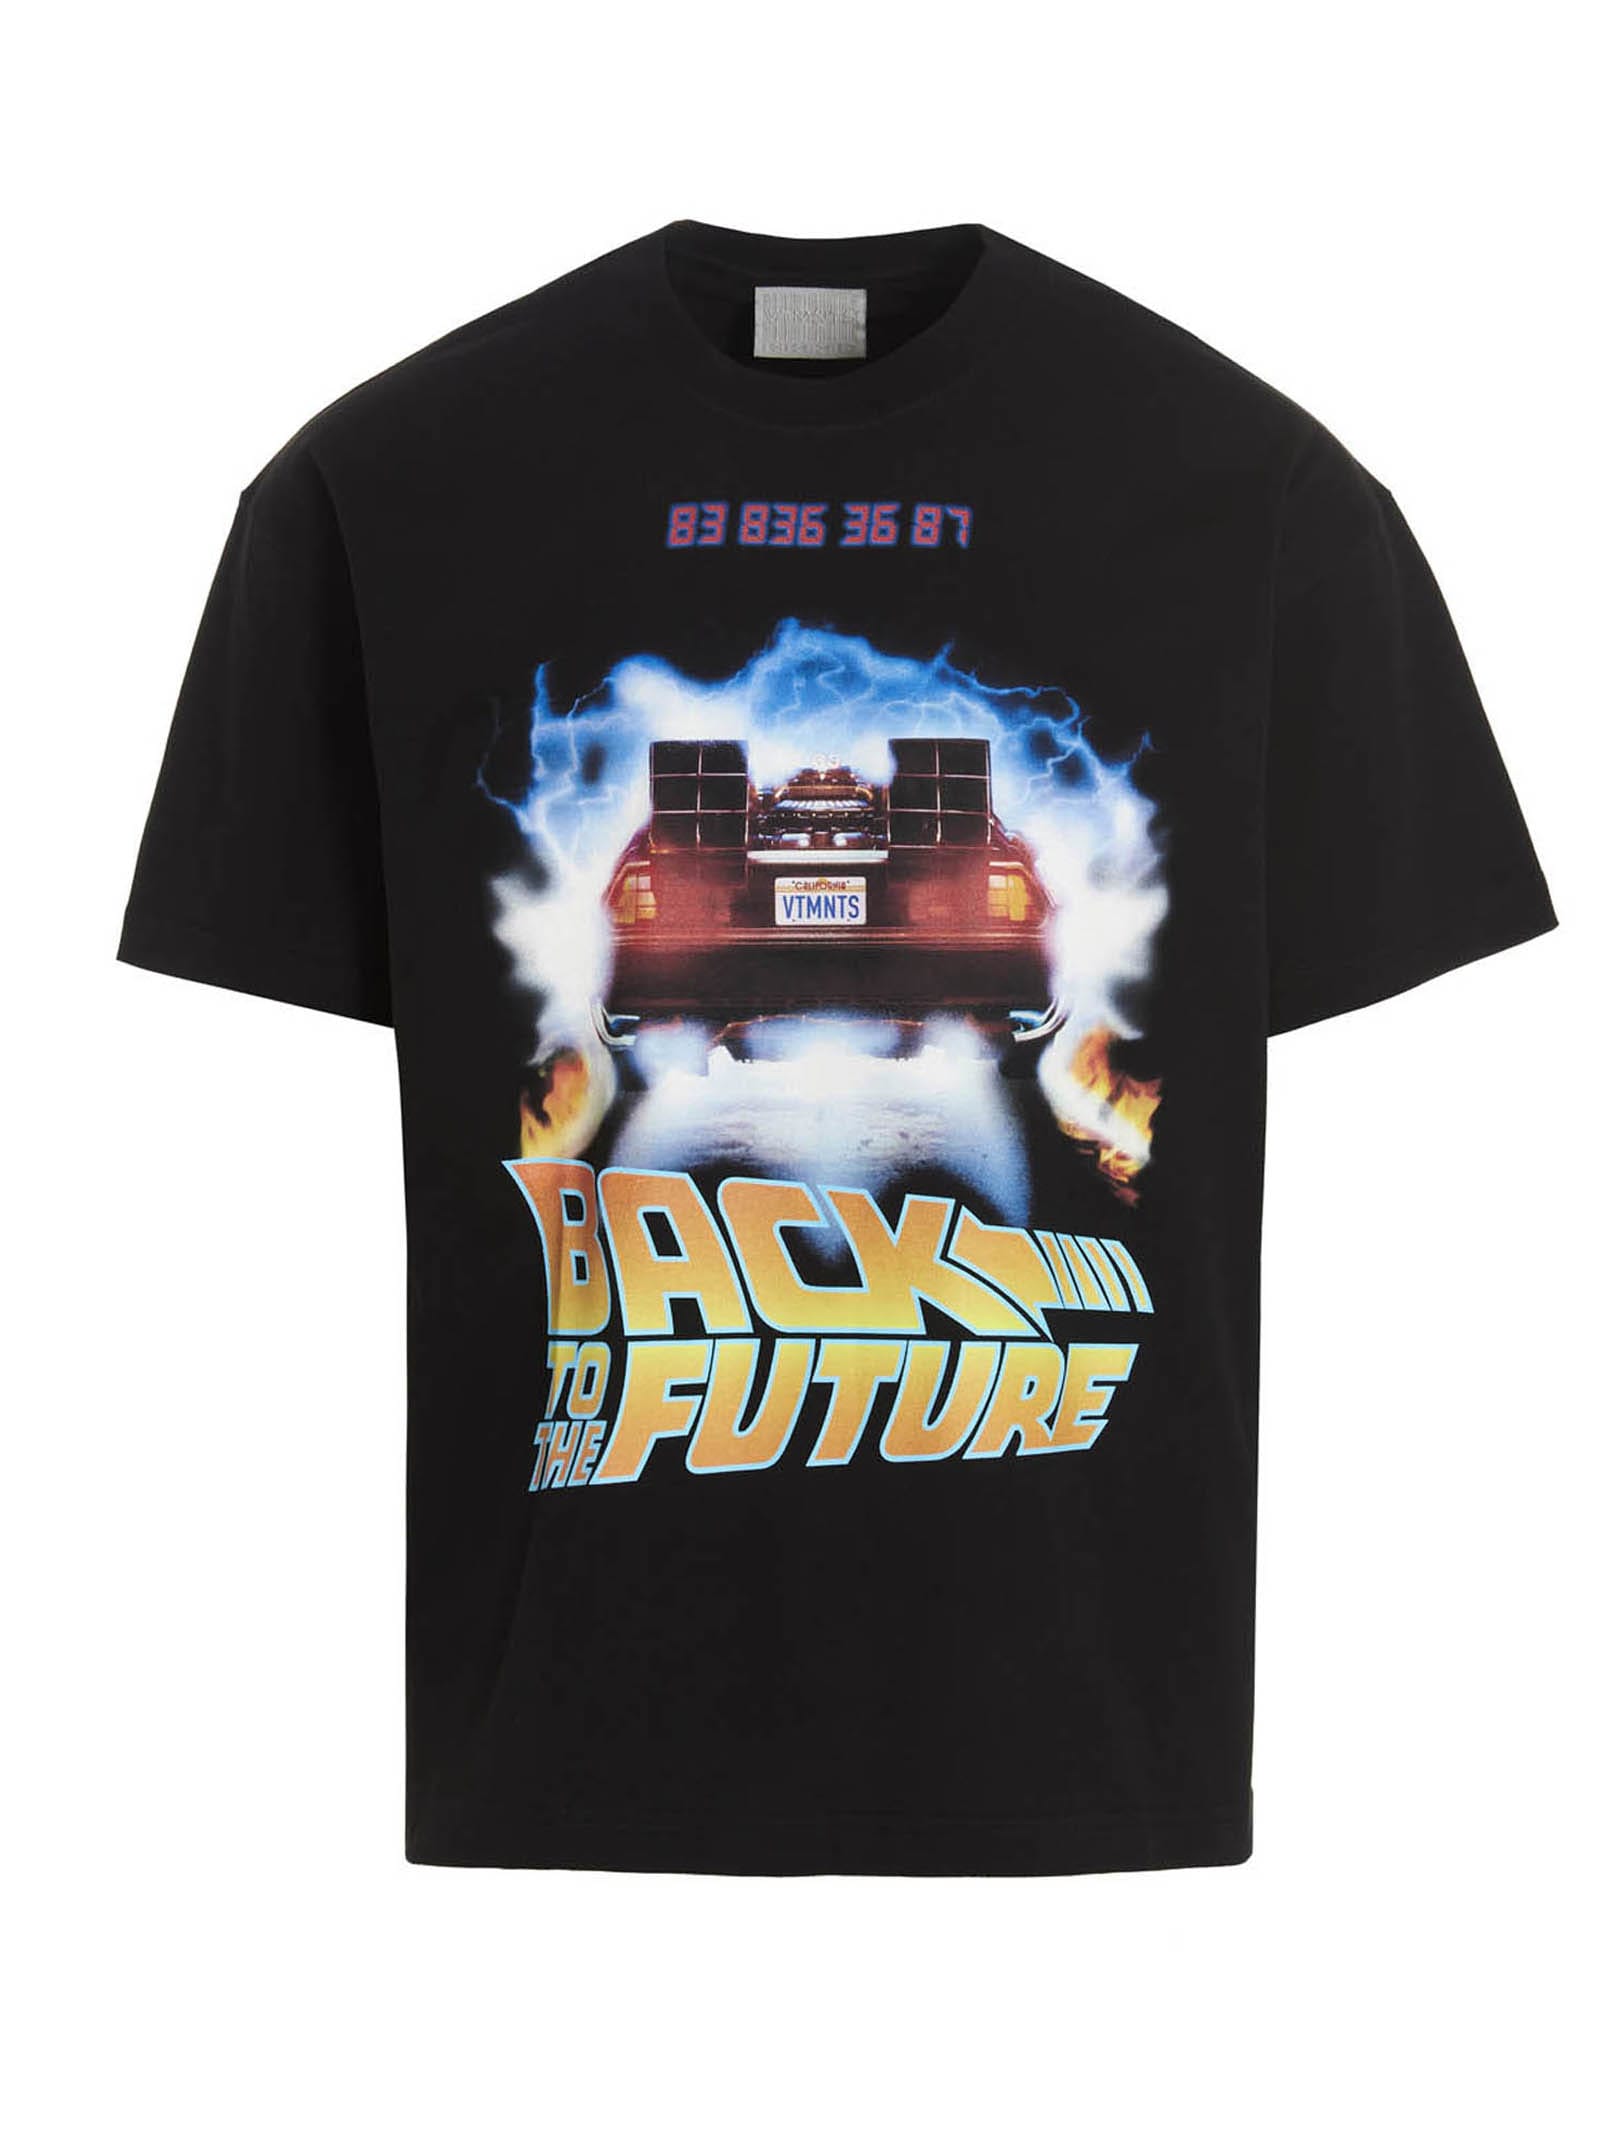 vtmnts back to the future